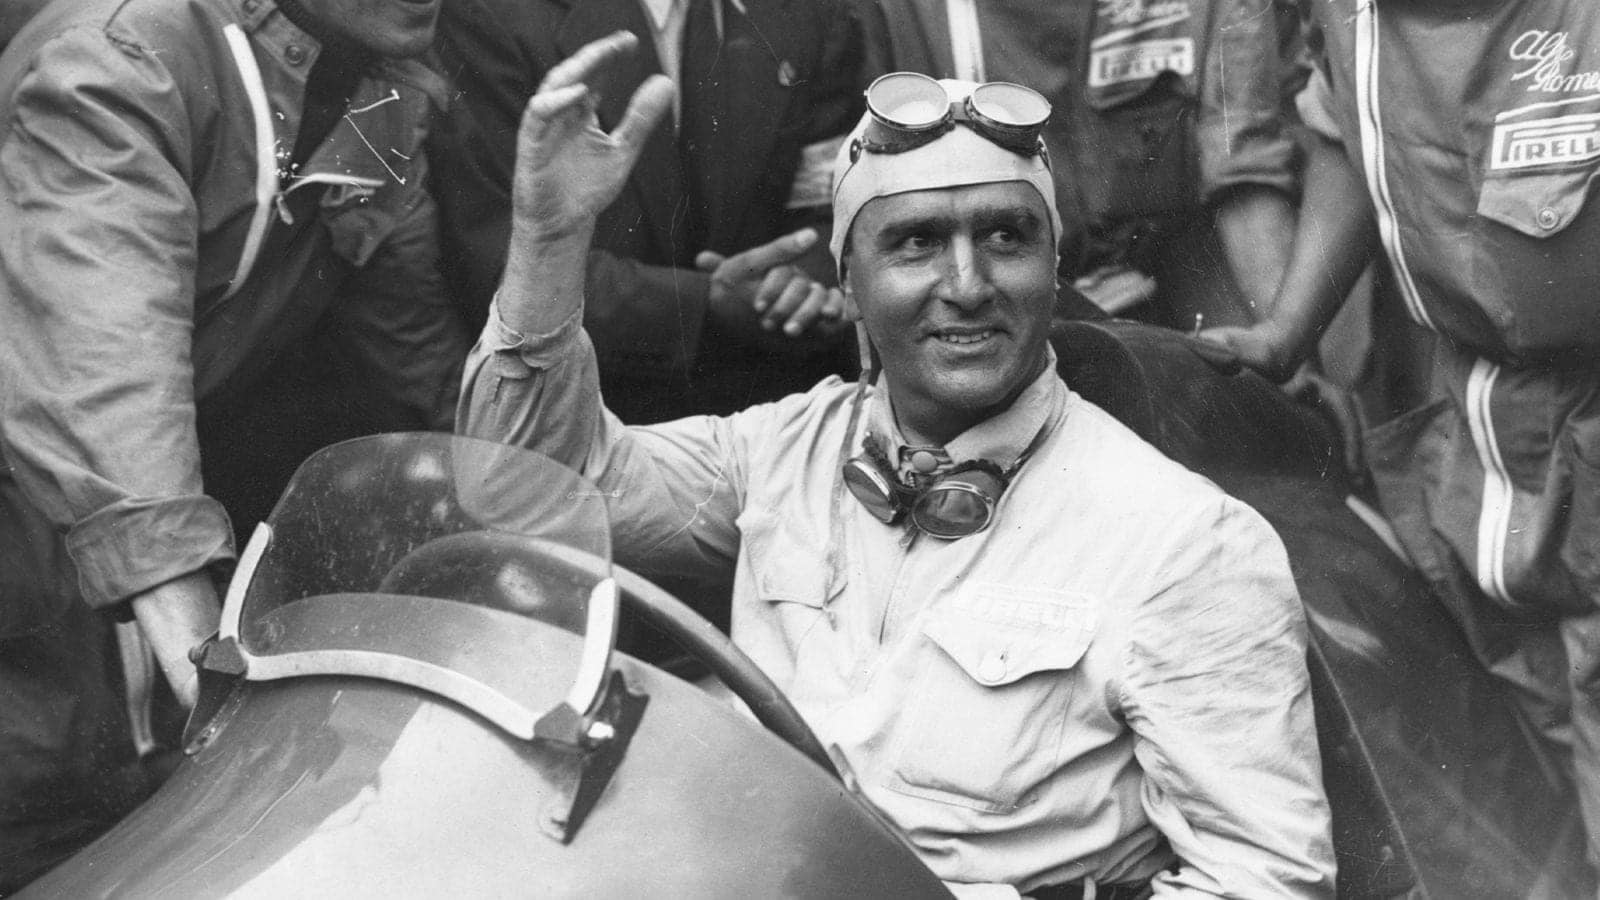 Giuseppe Farina surrounded by crowds after winning the 1950 International Trophy Race at Silverstone